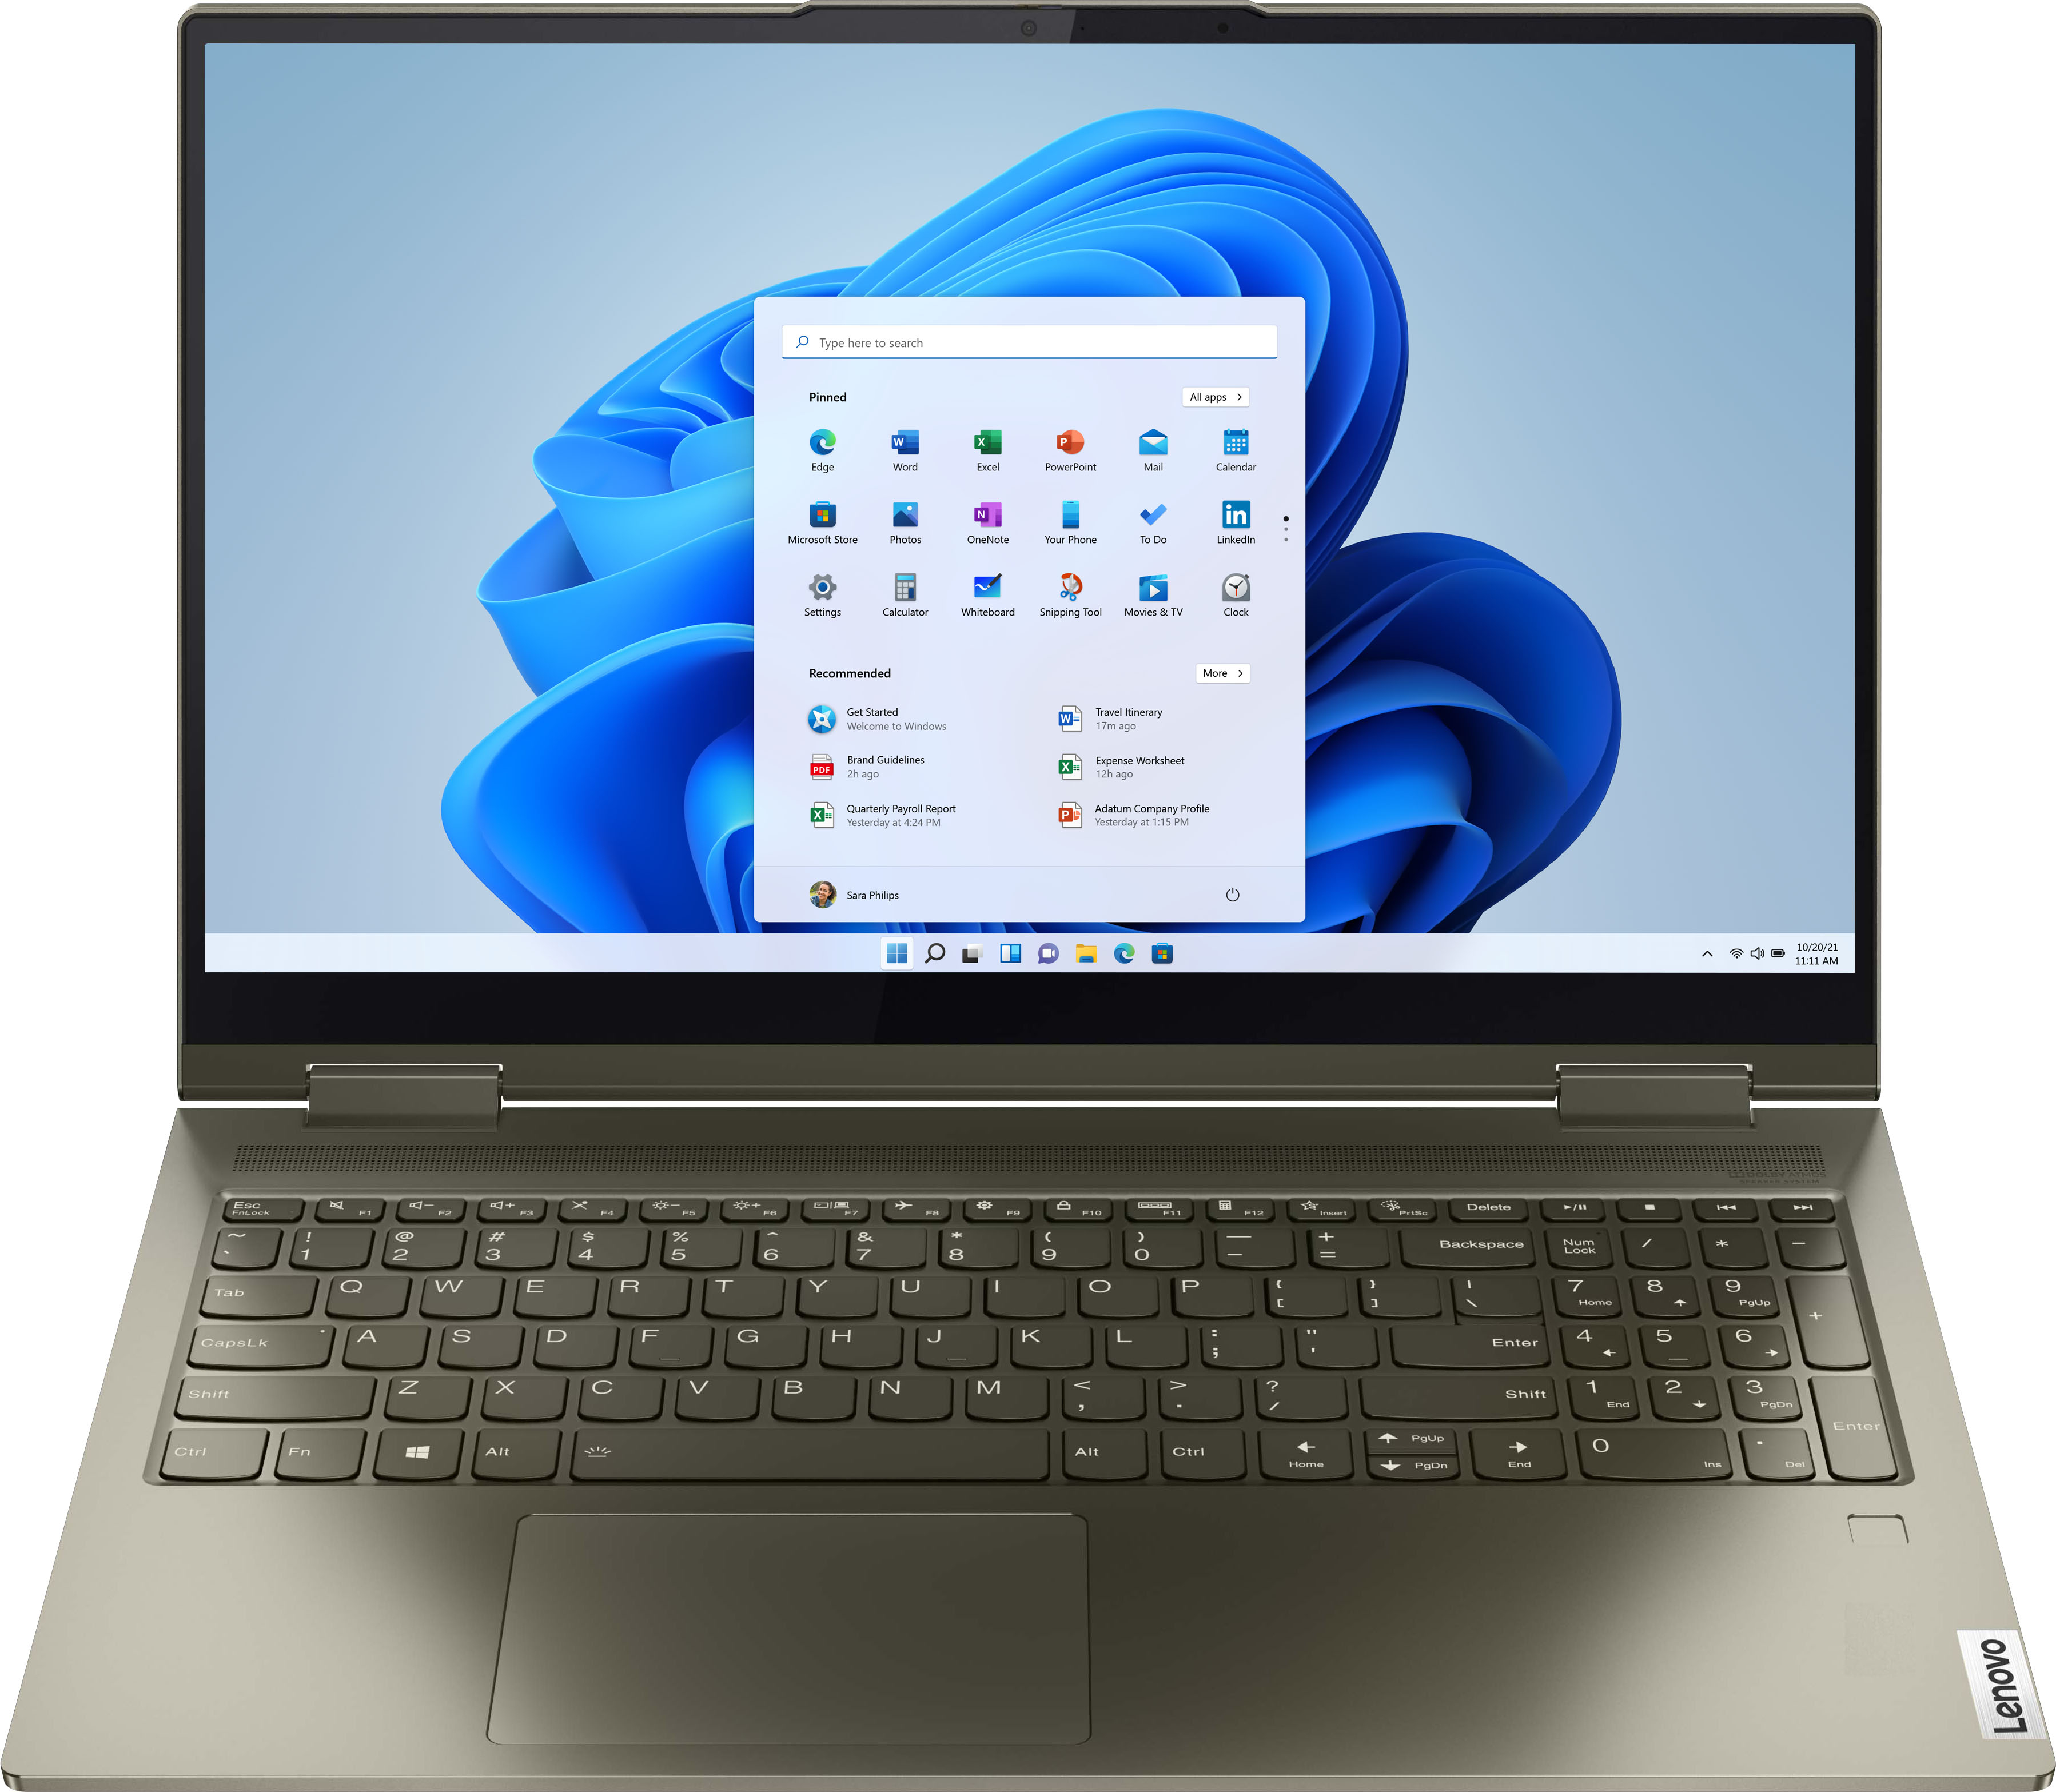 Lenovo - Yoga 7i 2-in-1 15.6" Touch Screen Laptop - Intel Evo Platform Core i7 - 12GB Memory - 512GB Solid State Drive $849.99 at Best Buy